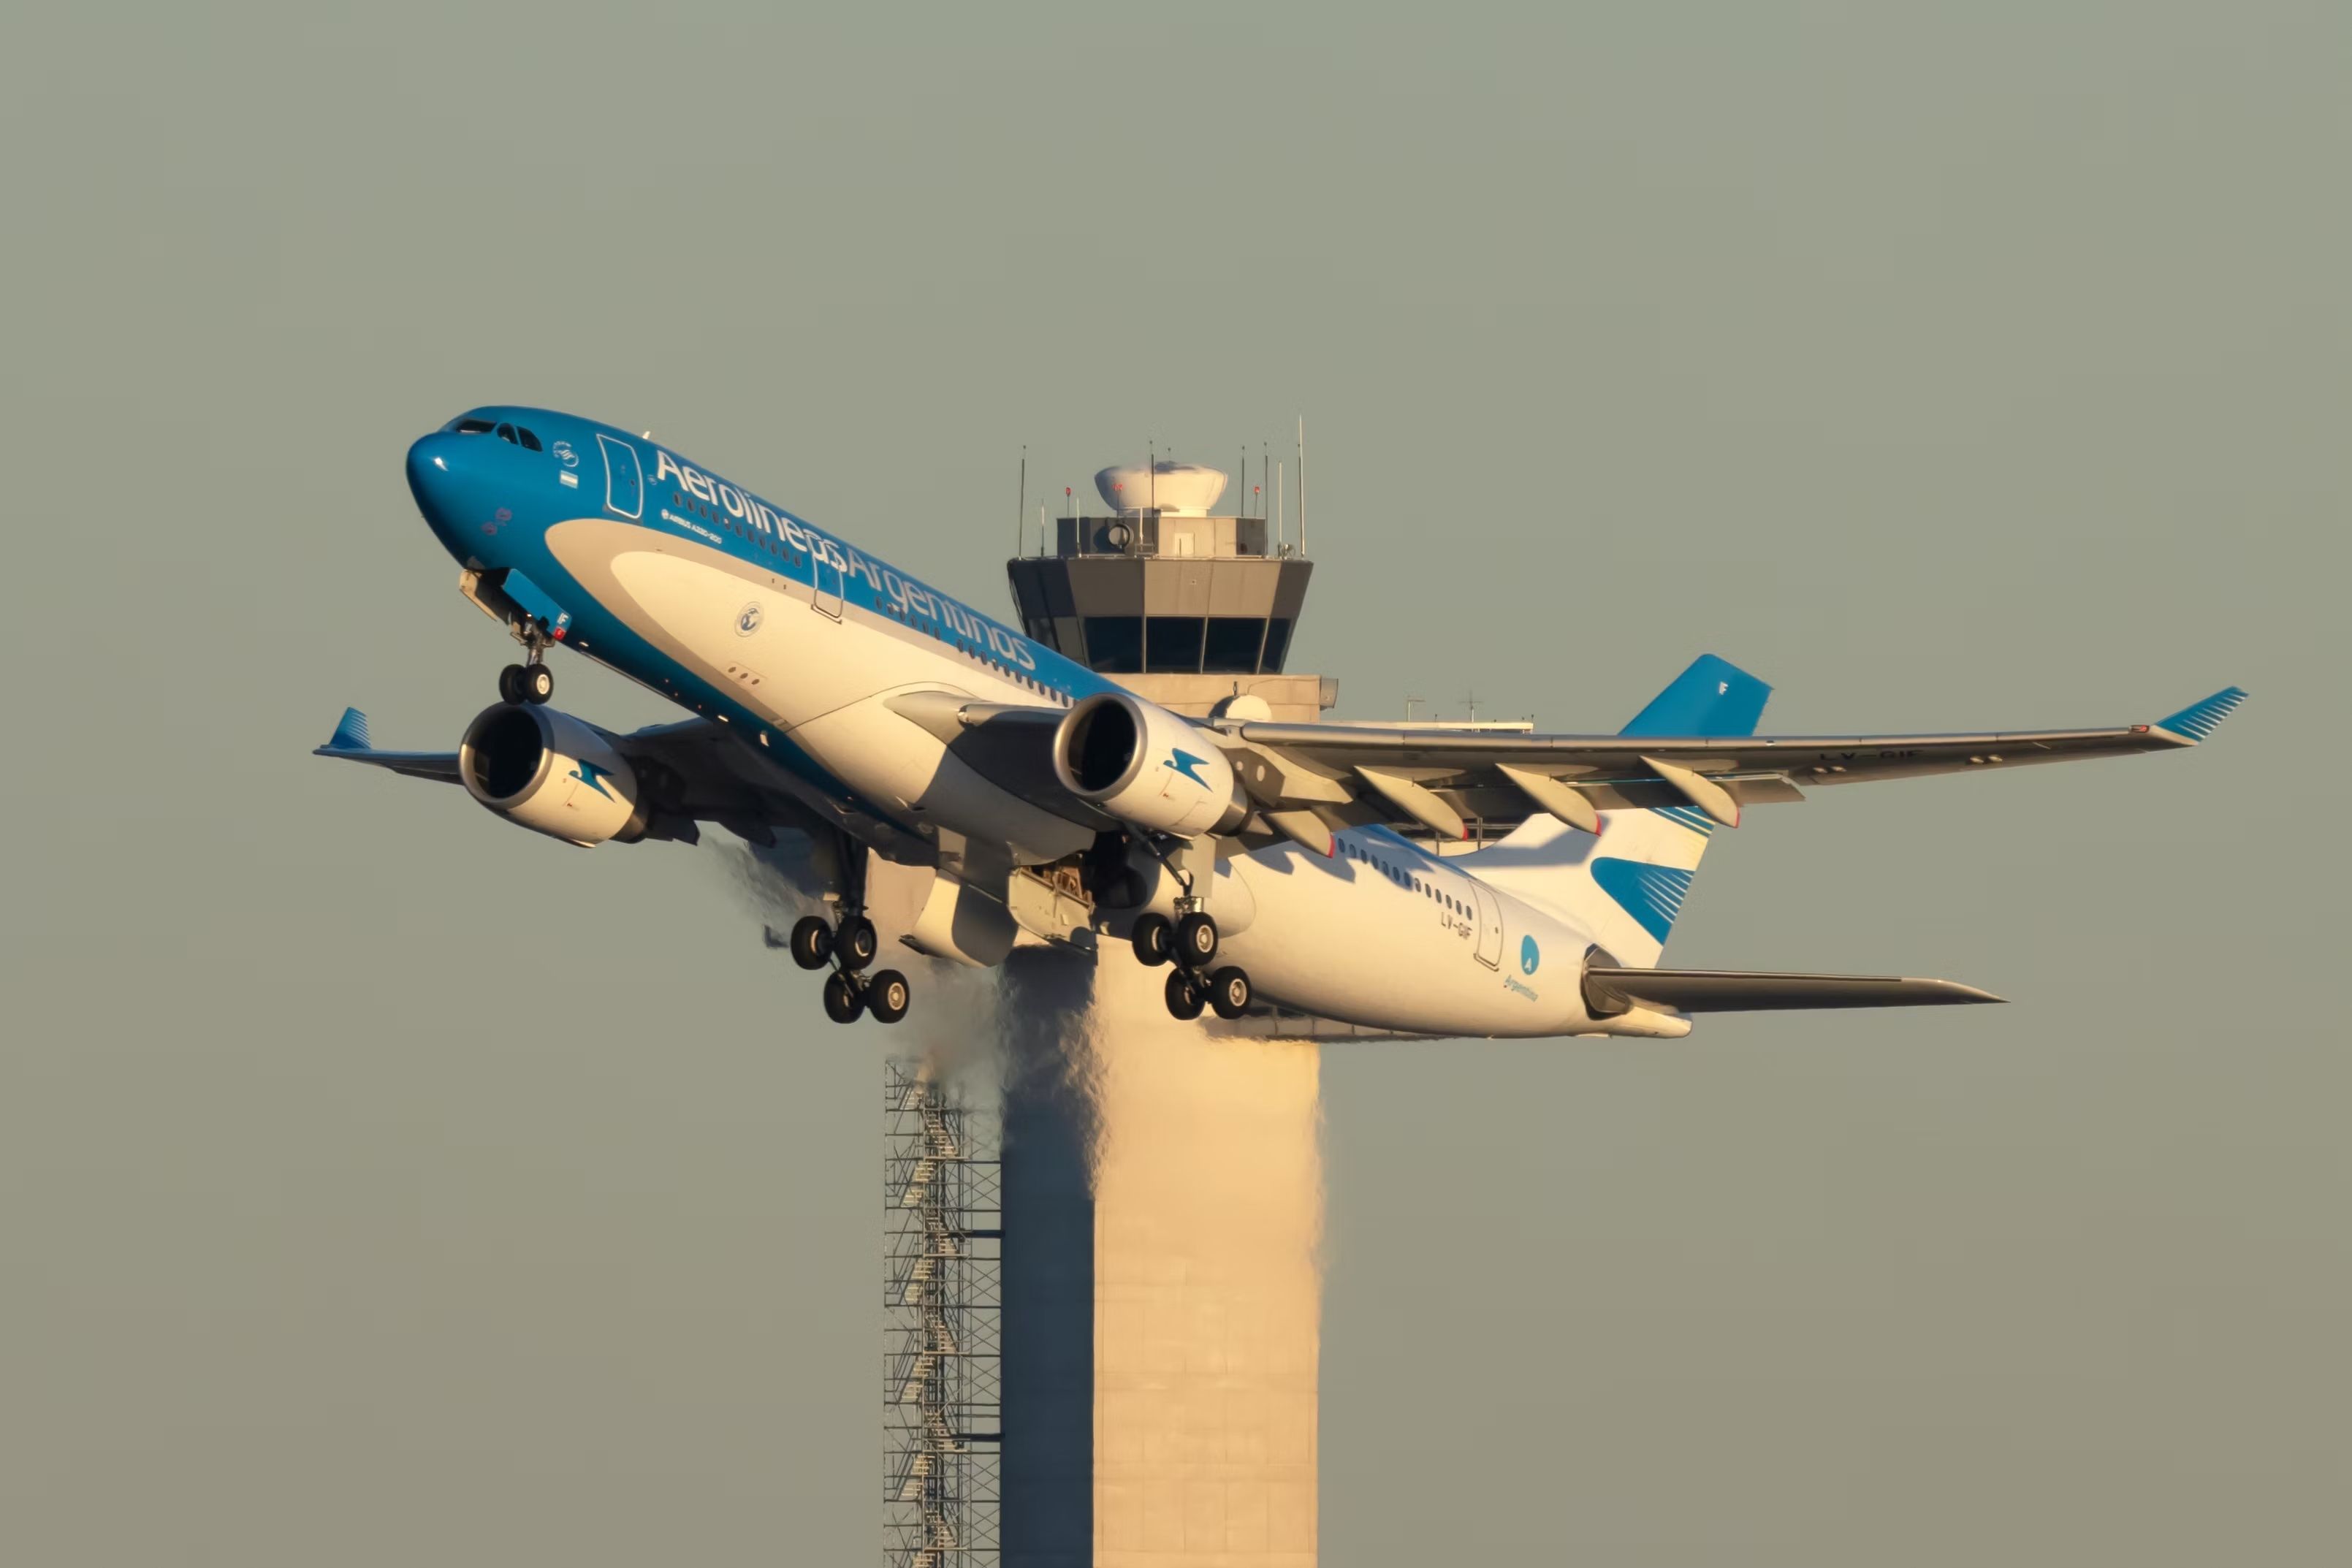 An Aerolineas Argentinas Airbus A330-202 flying in the sky.